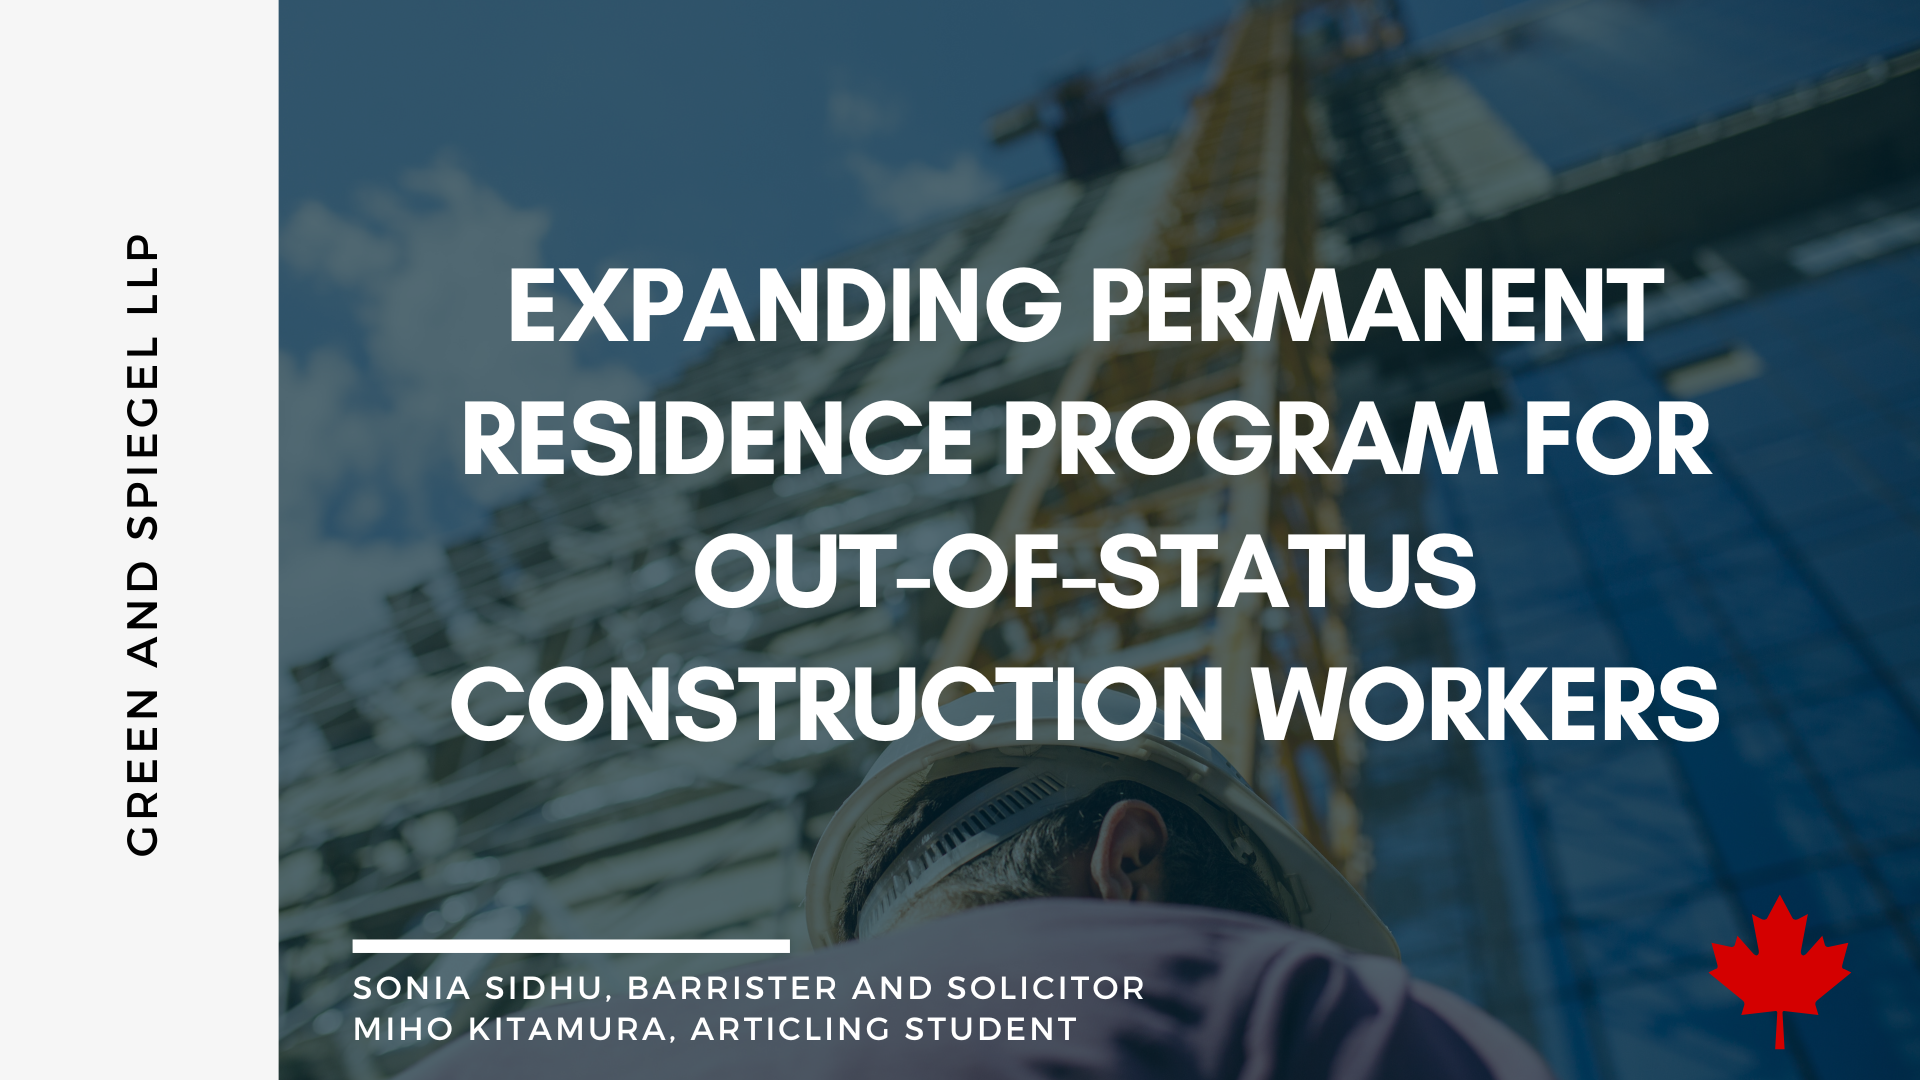 EXPANDING PERMANENT RESIDENCE PROGRAM FOR OUT-OF-STATUS CONSTRUCTION WORKERS